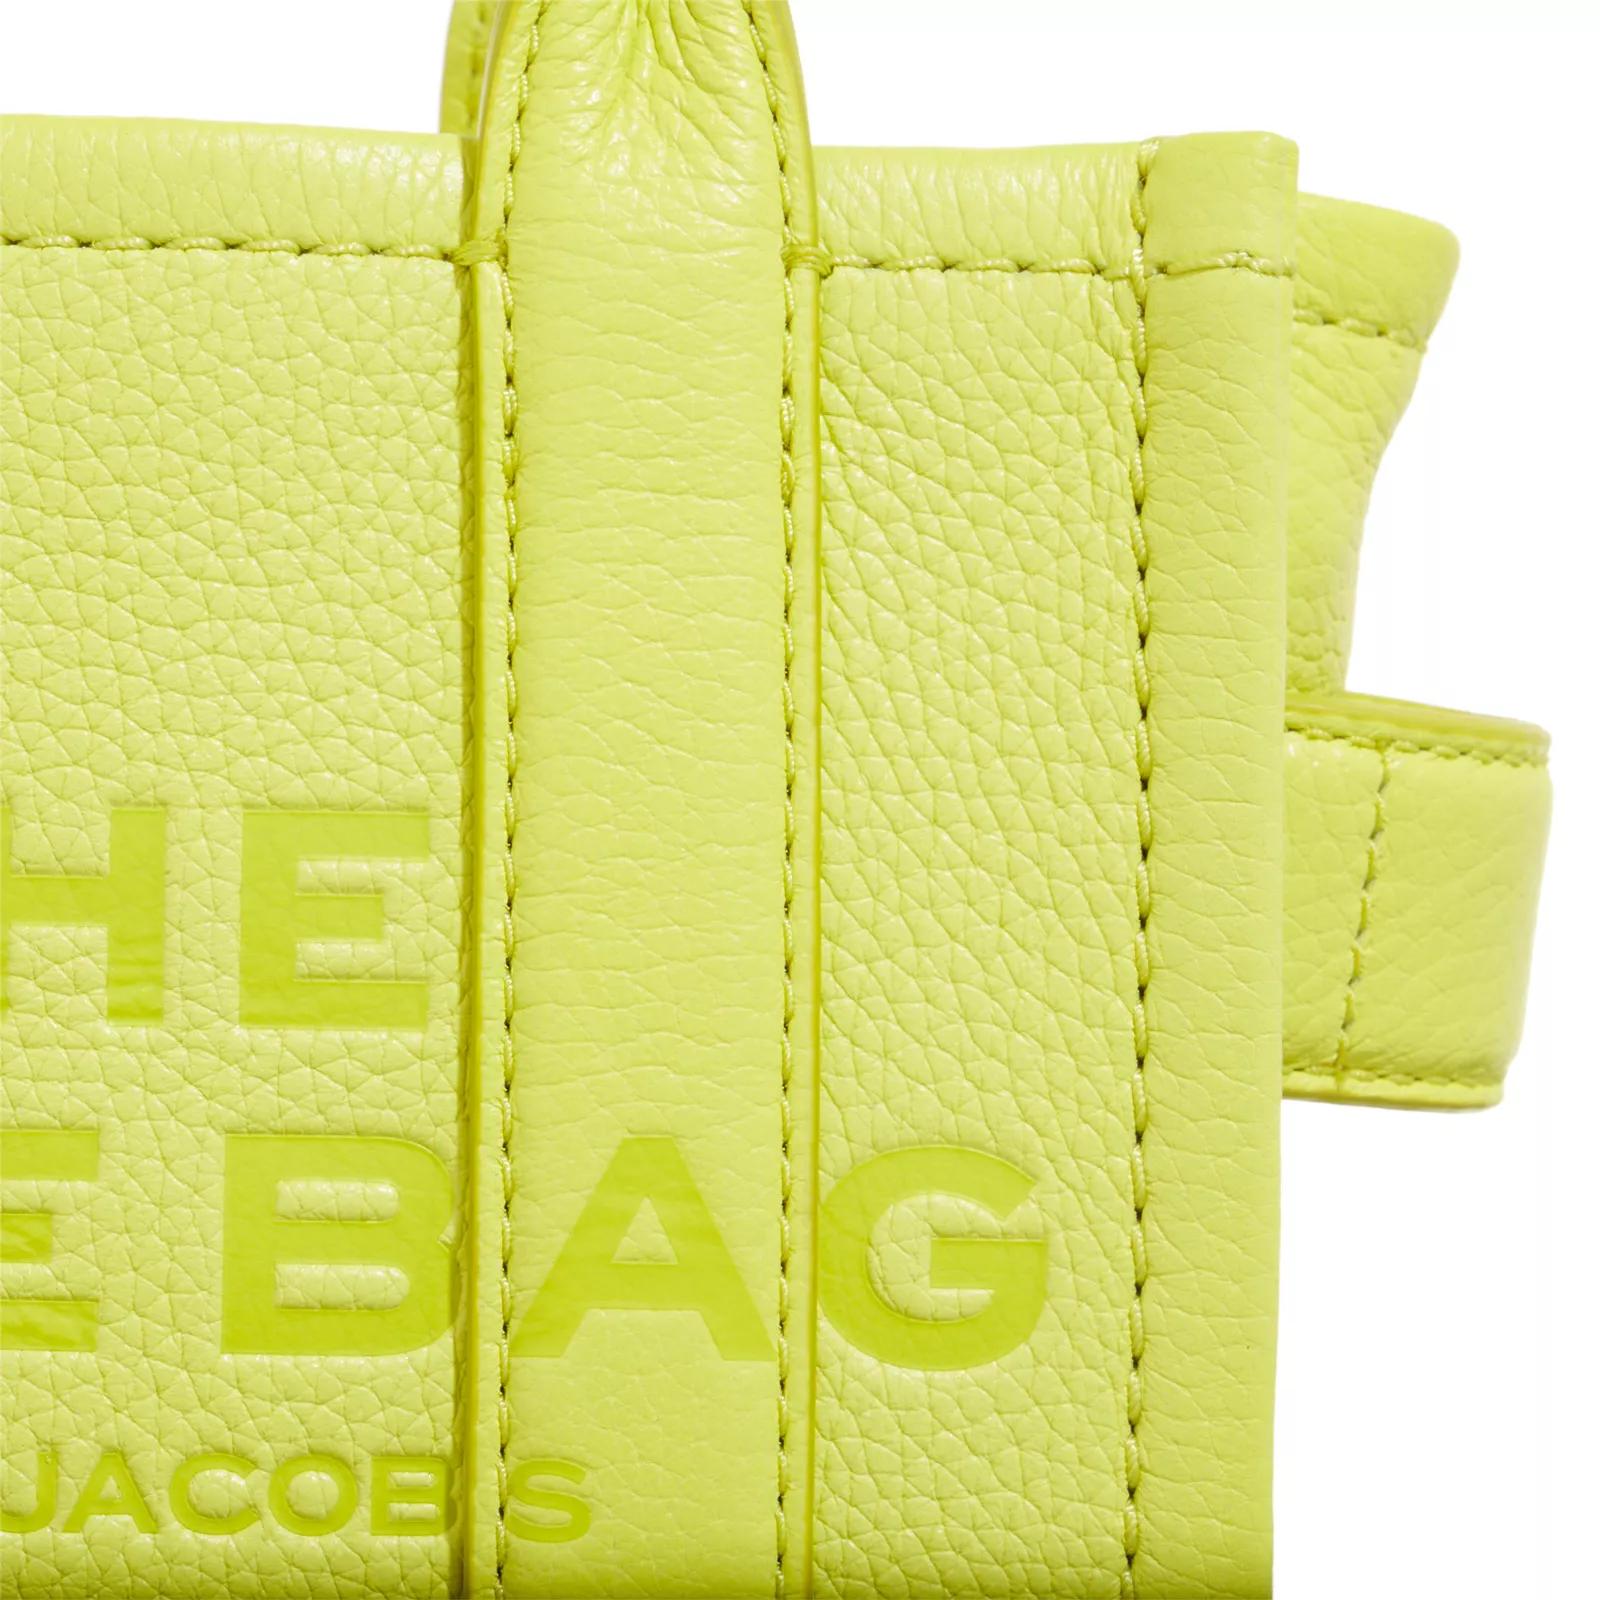 Marc Jacobs Totes The Tote Bag Leather in geel